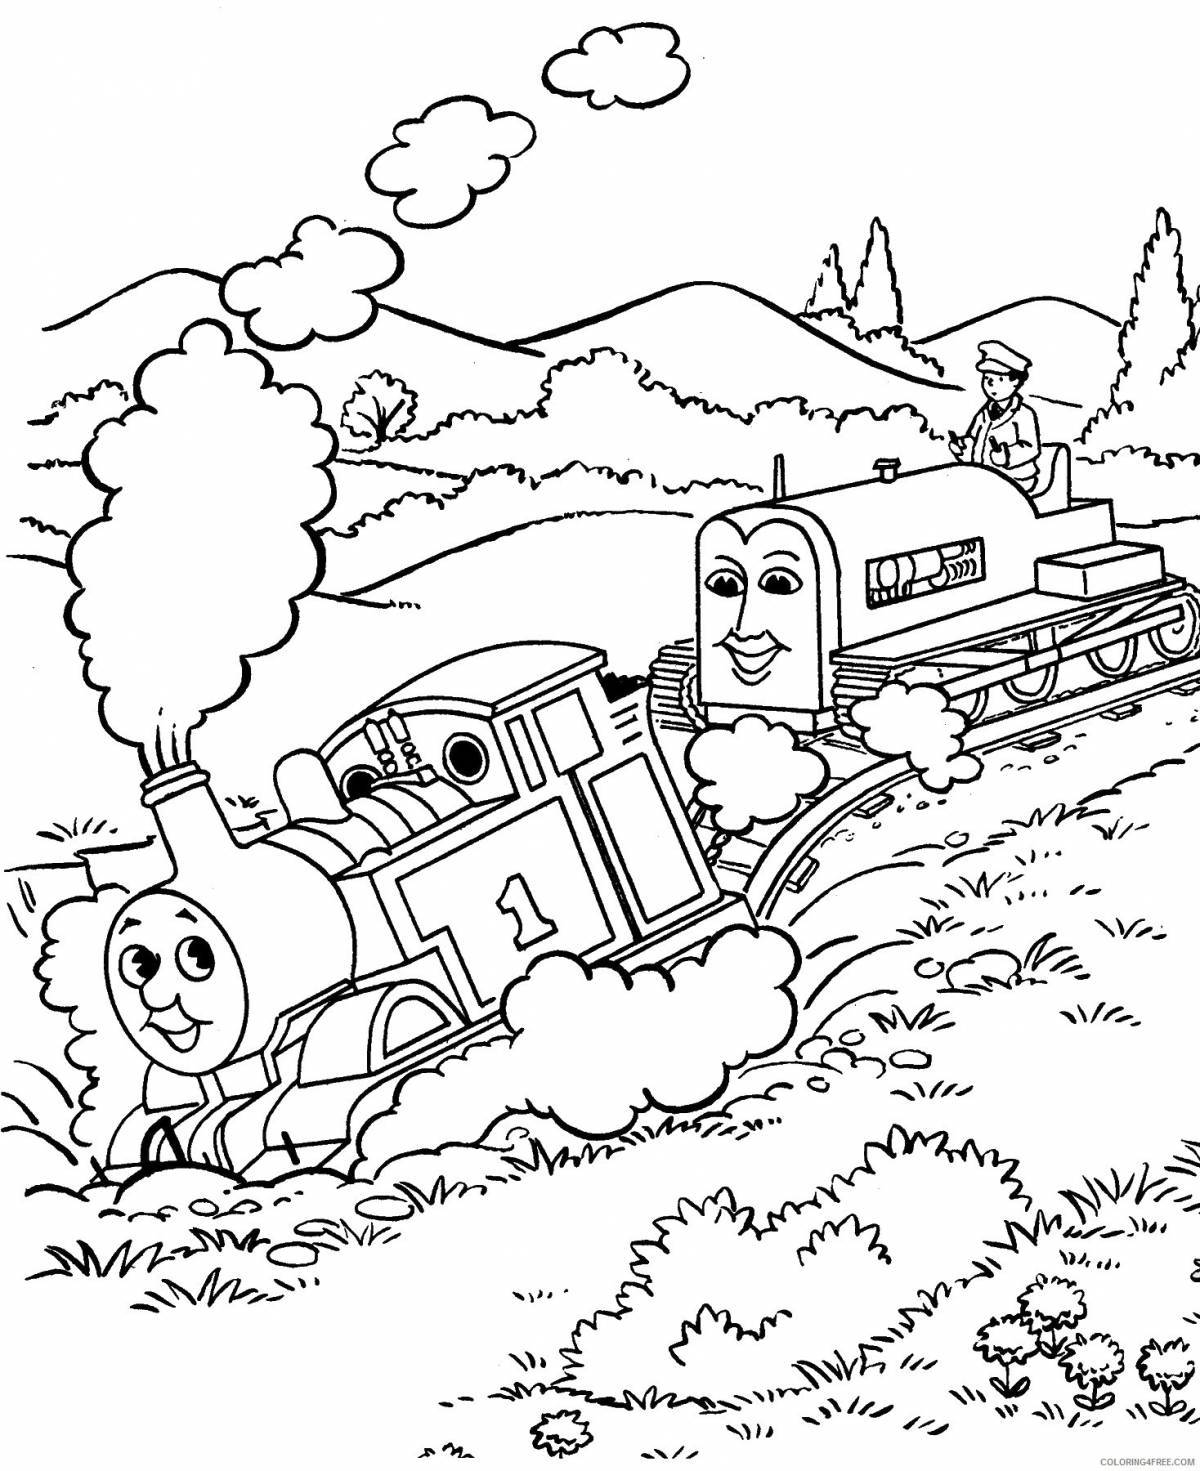 Coloring page playful thomas the tank engine